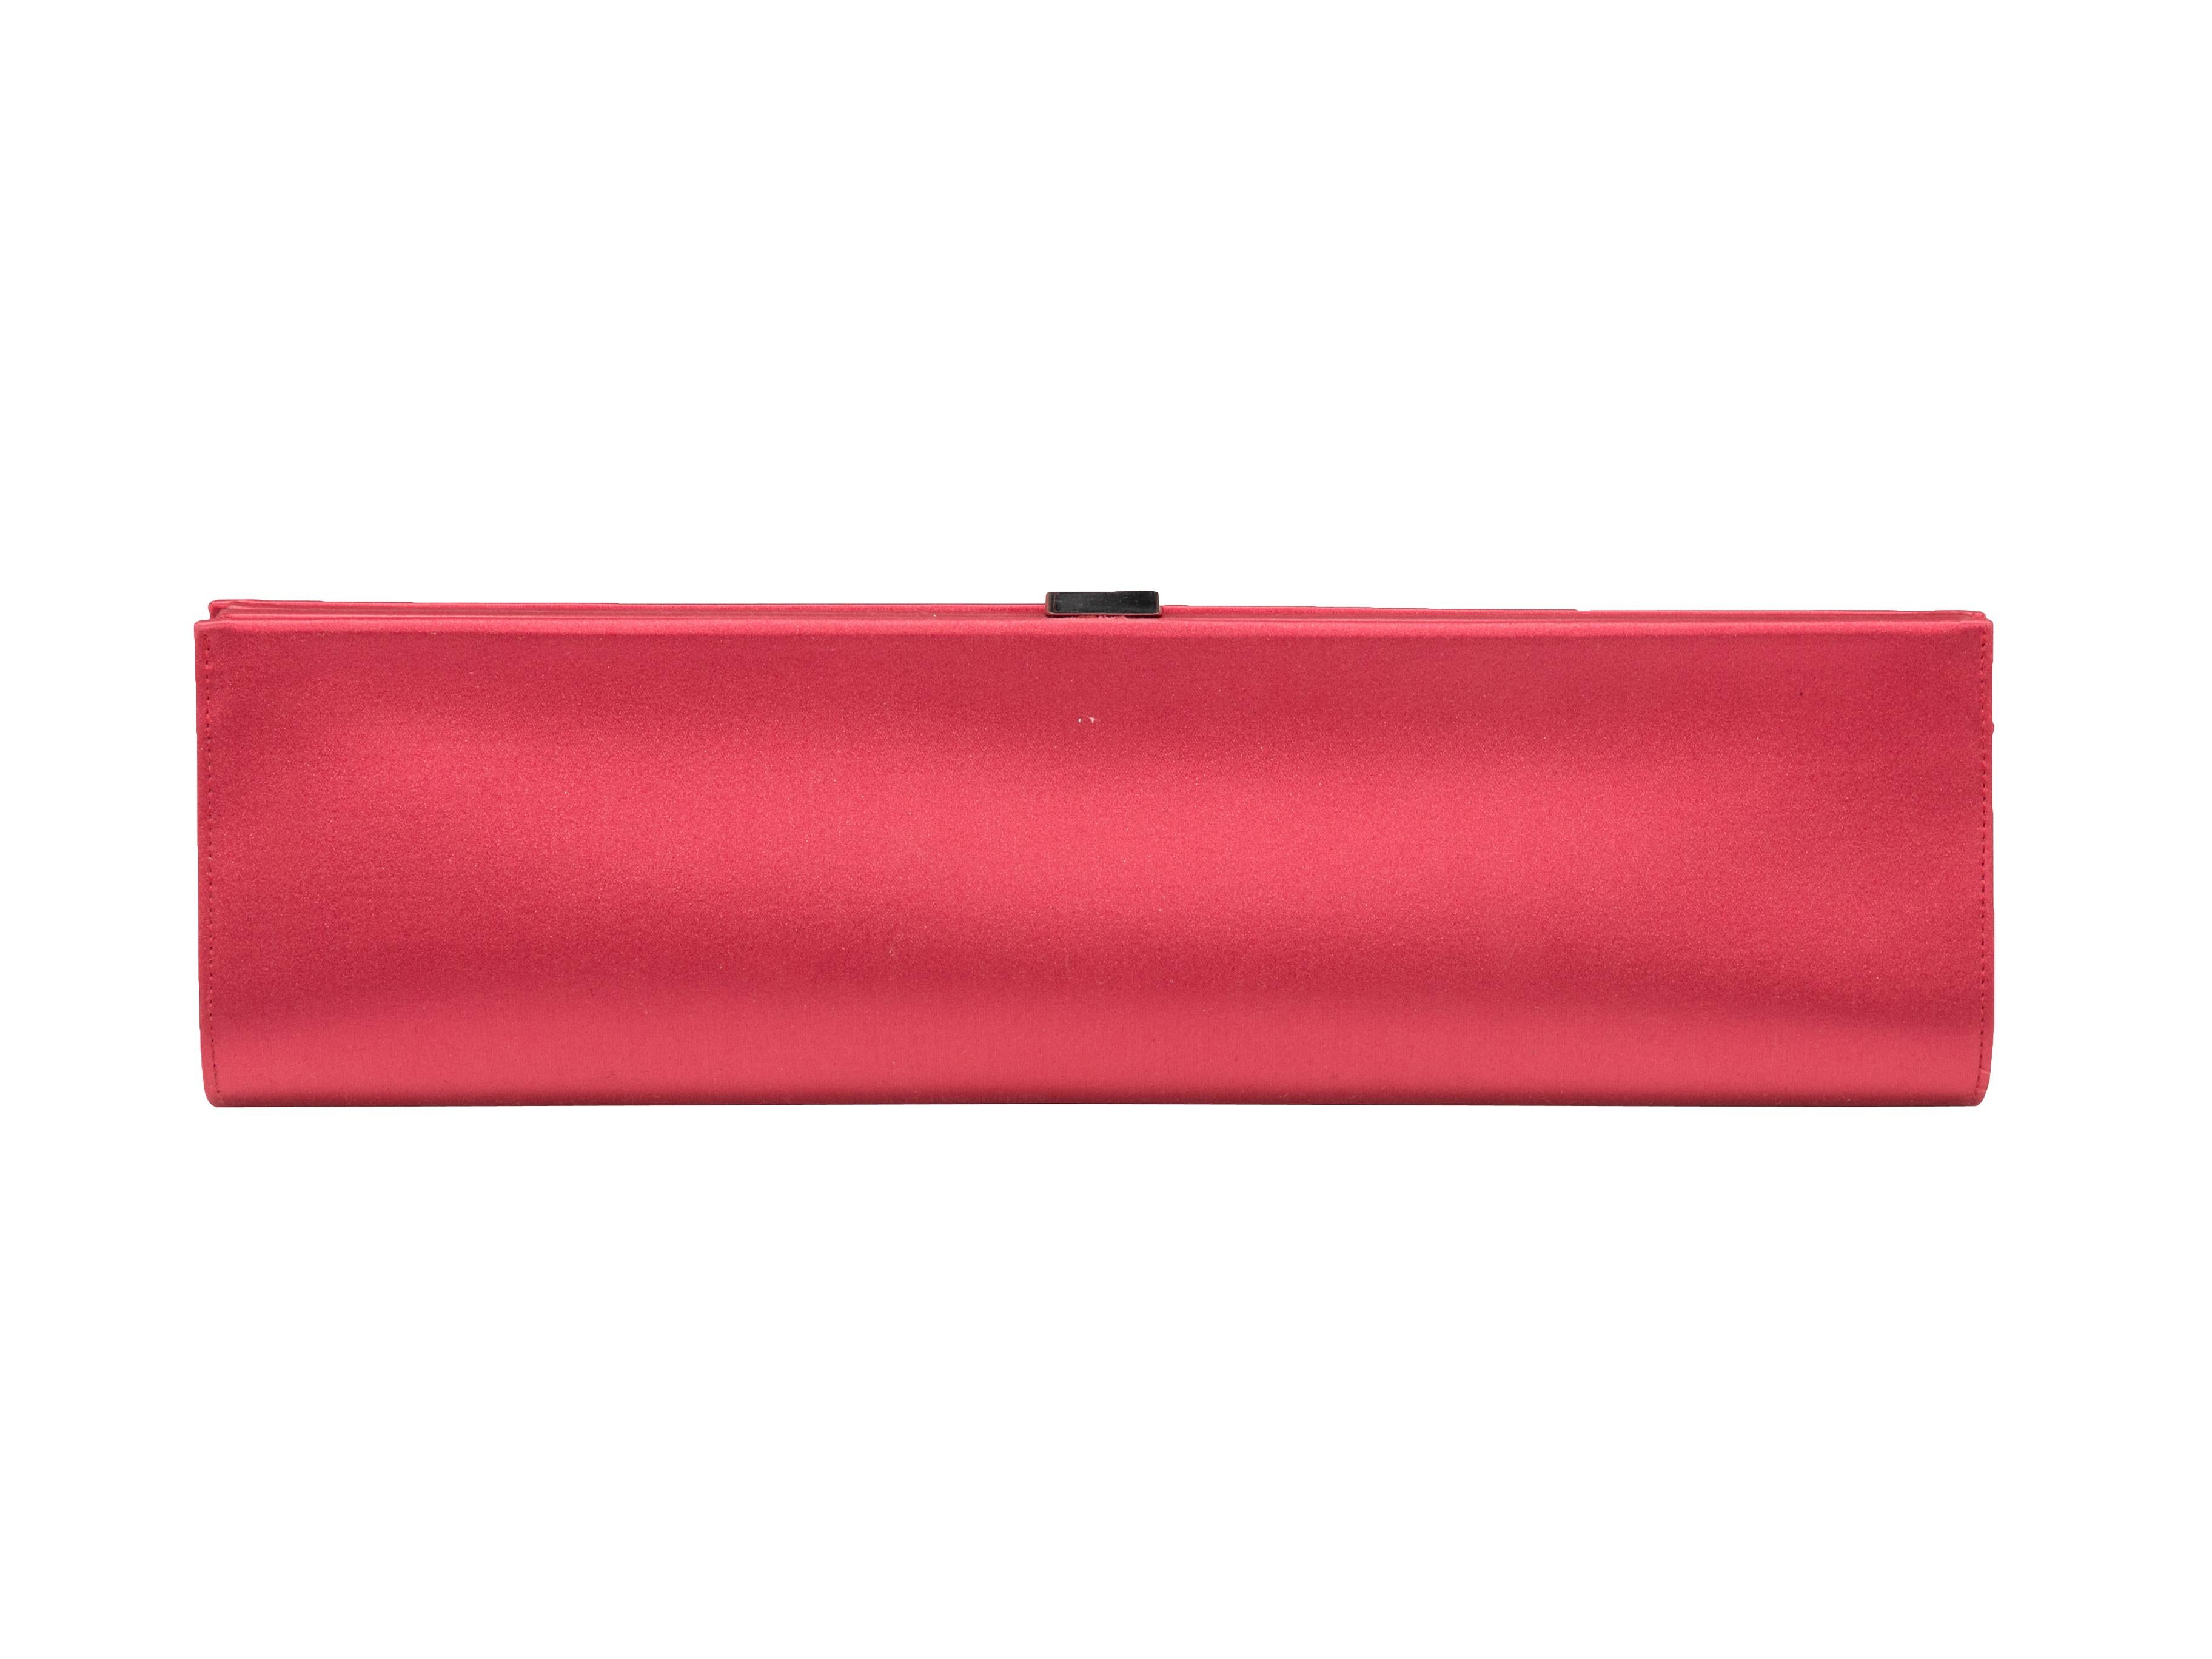 Pink Roger Vivier Satin Crystal-Embellished Clutch In Good Condition For Sale In New York, NY